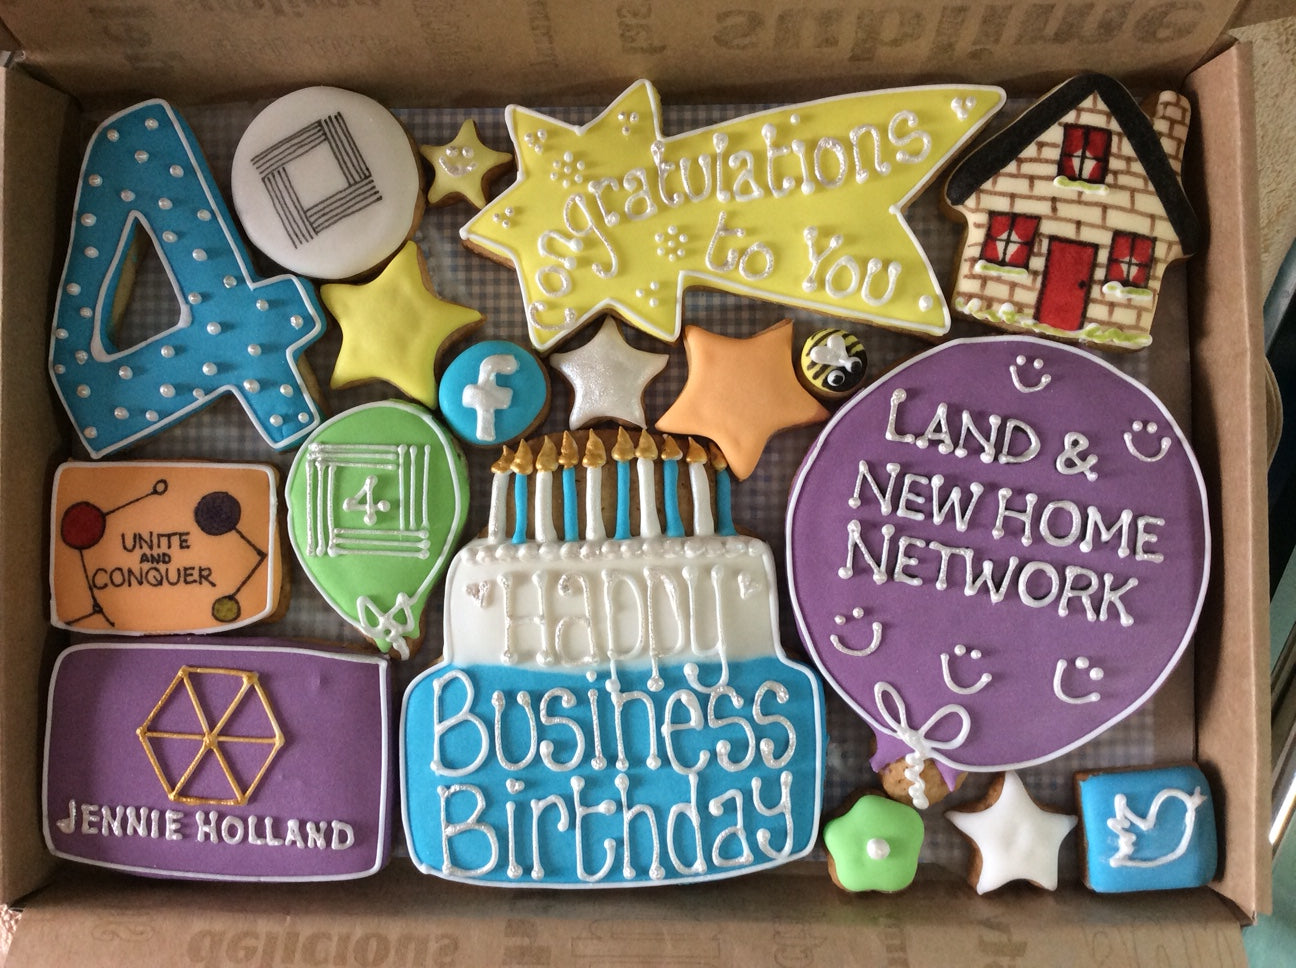 Welcome on board - Bespoke Corporate Cookie Box (Large)